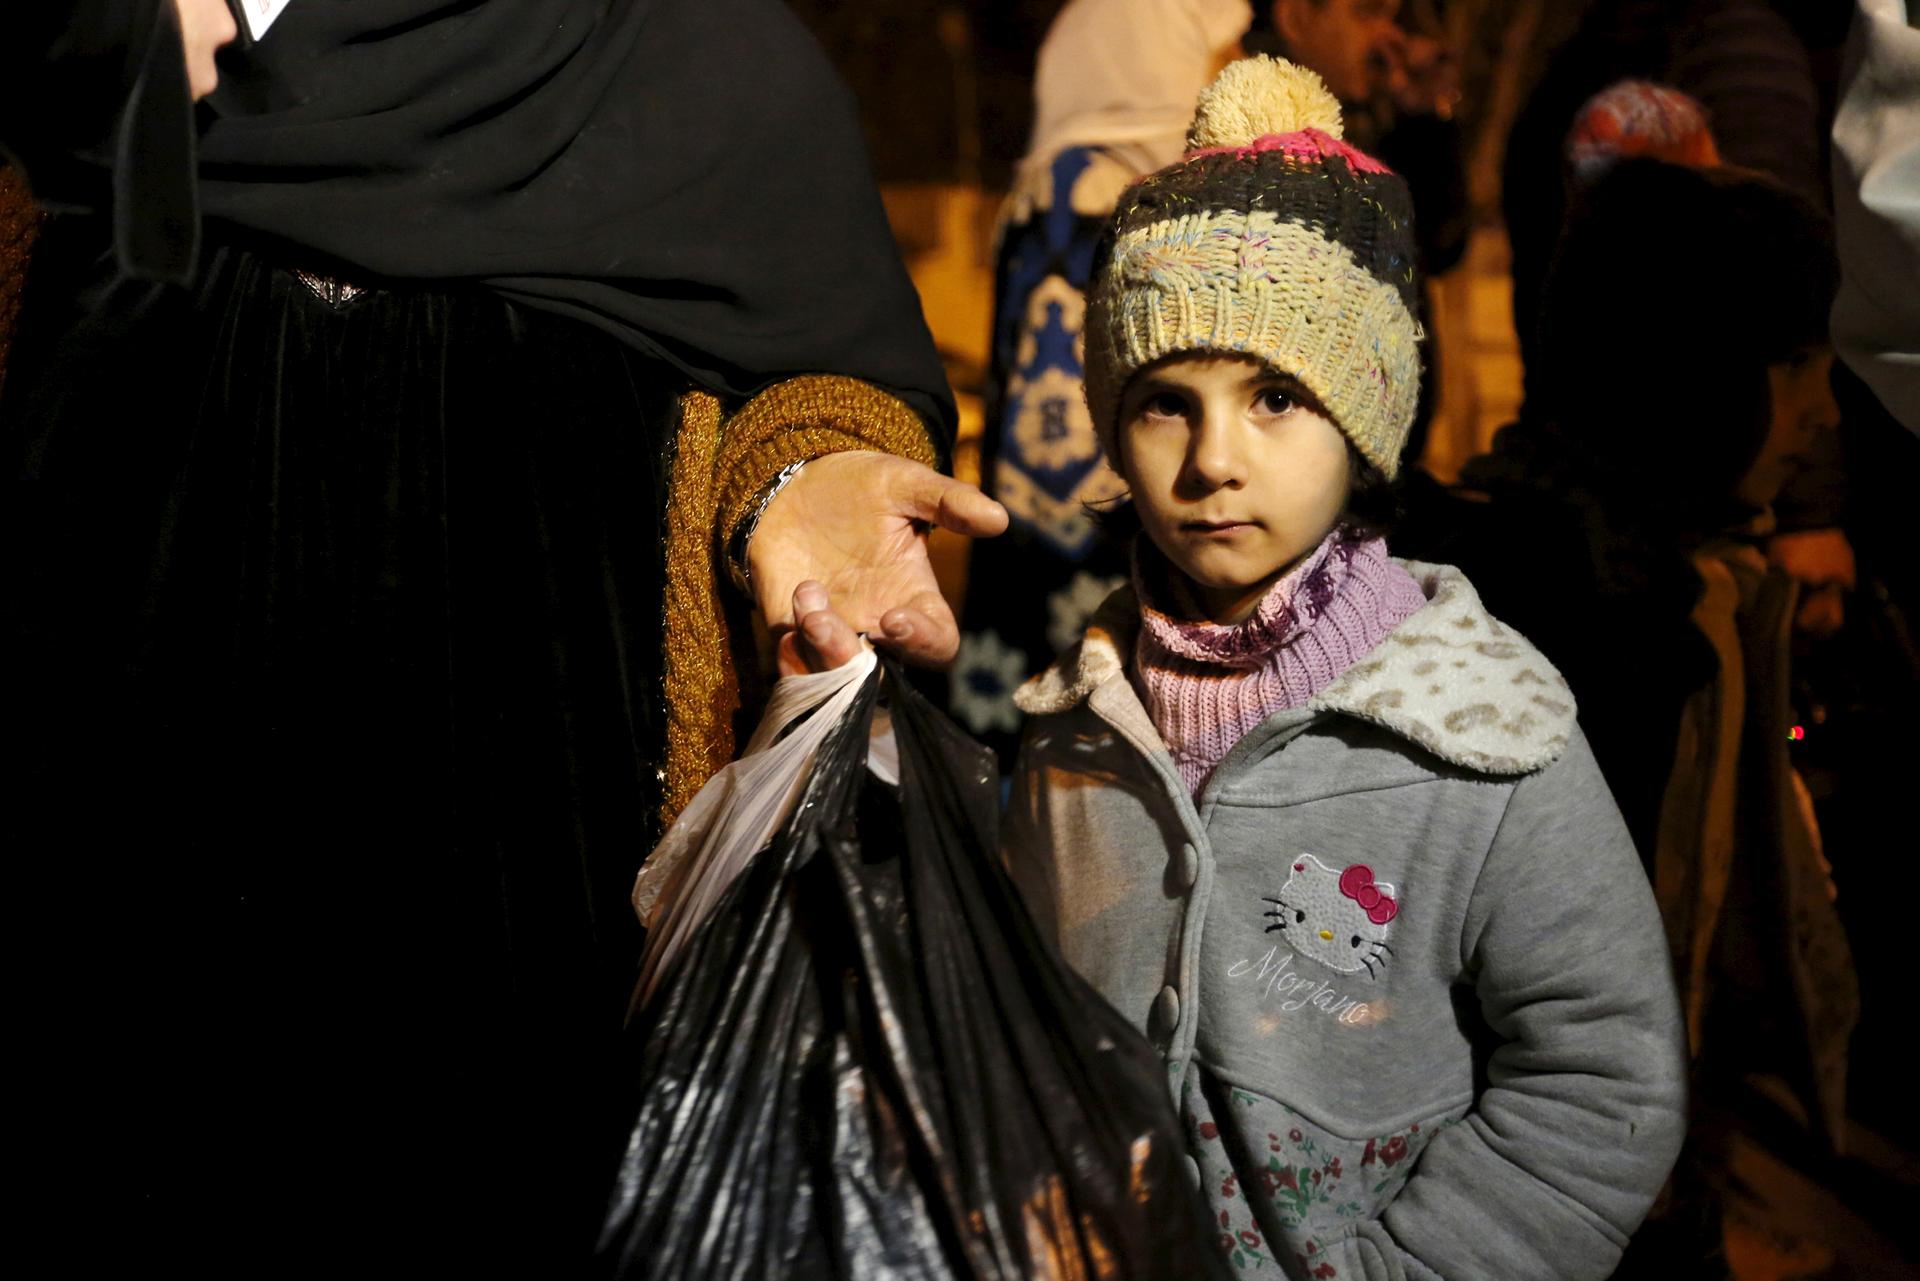 A Syrian girl waits with her family hoping to leave the town of Madaya where thousands have been dying of starvation. Trucks from international relief organizations entered Madaya January 11, 2016 carrying food and medical supplies.